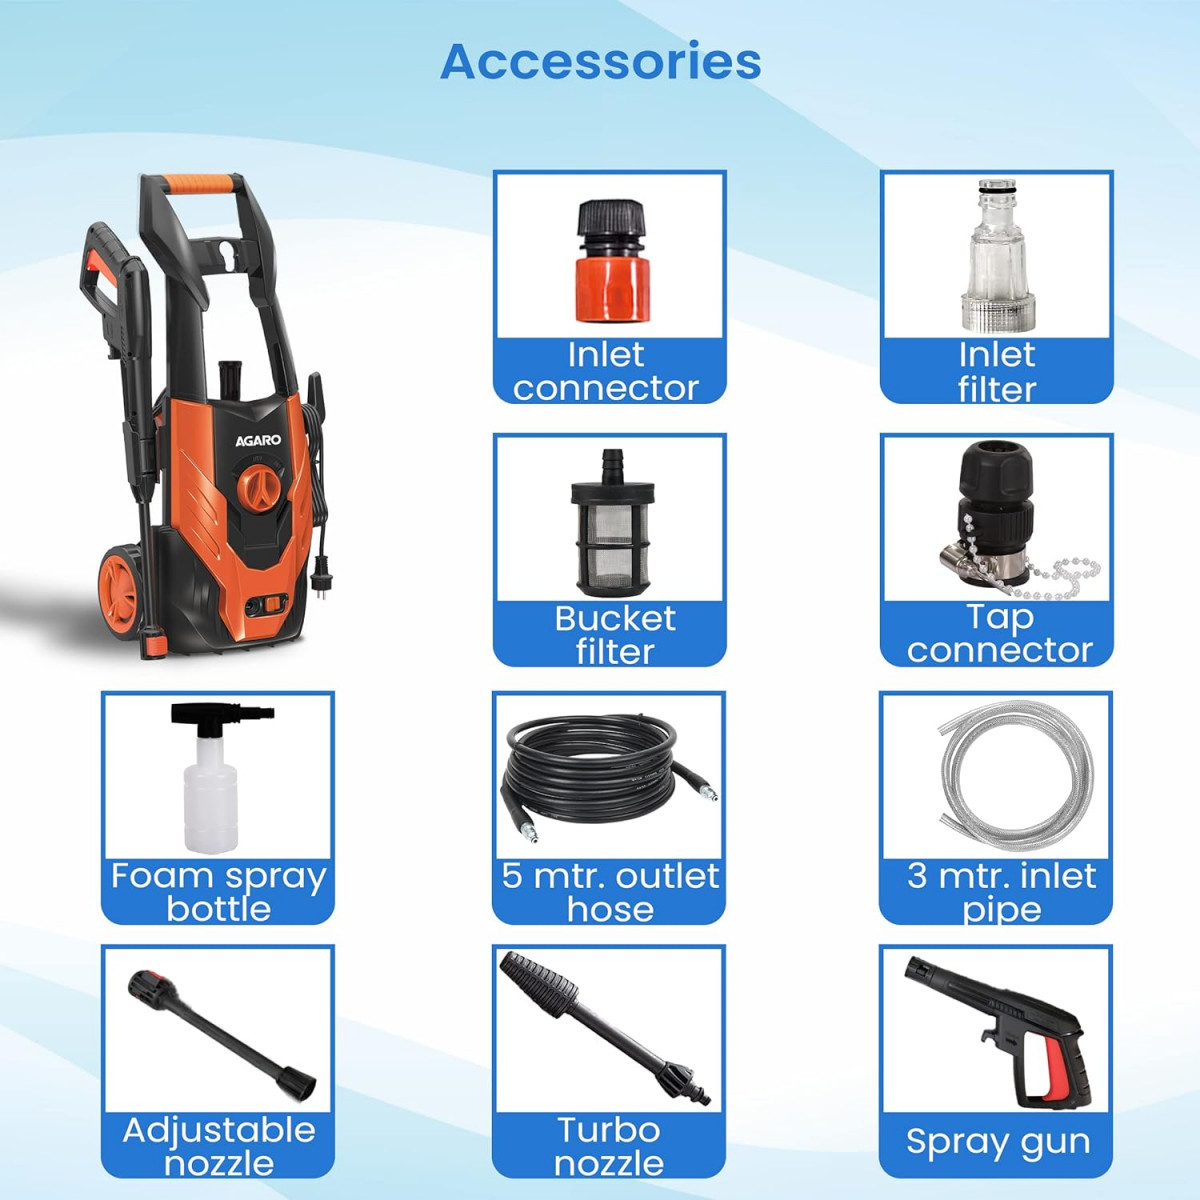 AGARO Grand High Pressure Washer 1500 Watts 110 Bars 65LMin Flow Rate 5 Meters Outlet HoseUpright Design with Wheel for CarBike and Home Cleaning Purpose Free Turbo Nozzle Black and Orange